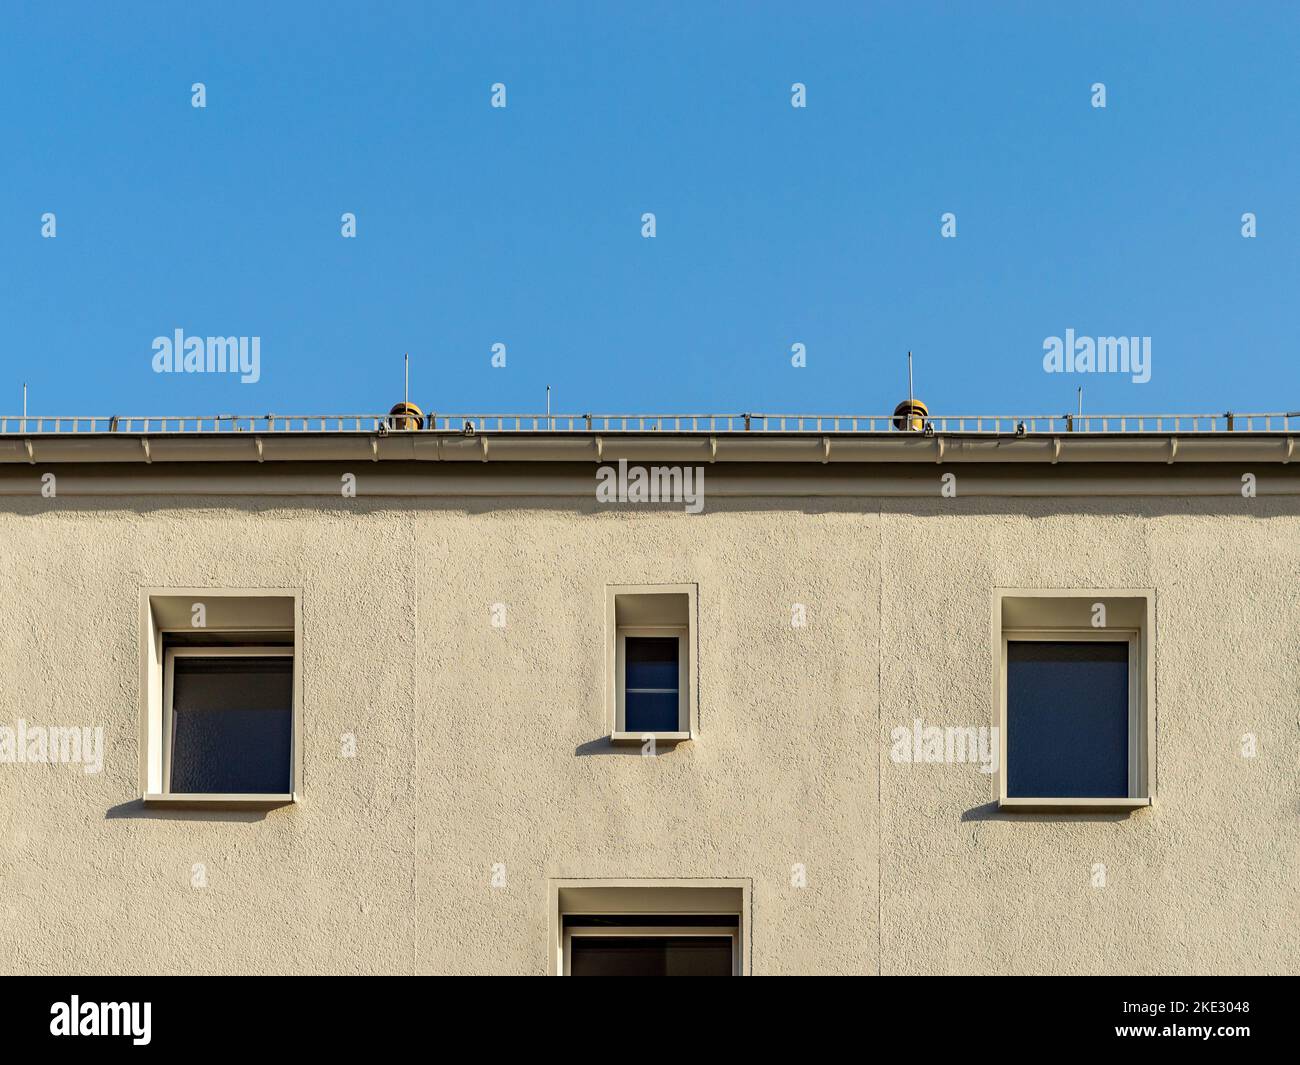 Symmetric facade of a residential house. White wall plaster with windows on the building exterior. Looking up to the roof gutter and the blue sky. Stock Photo